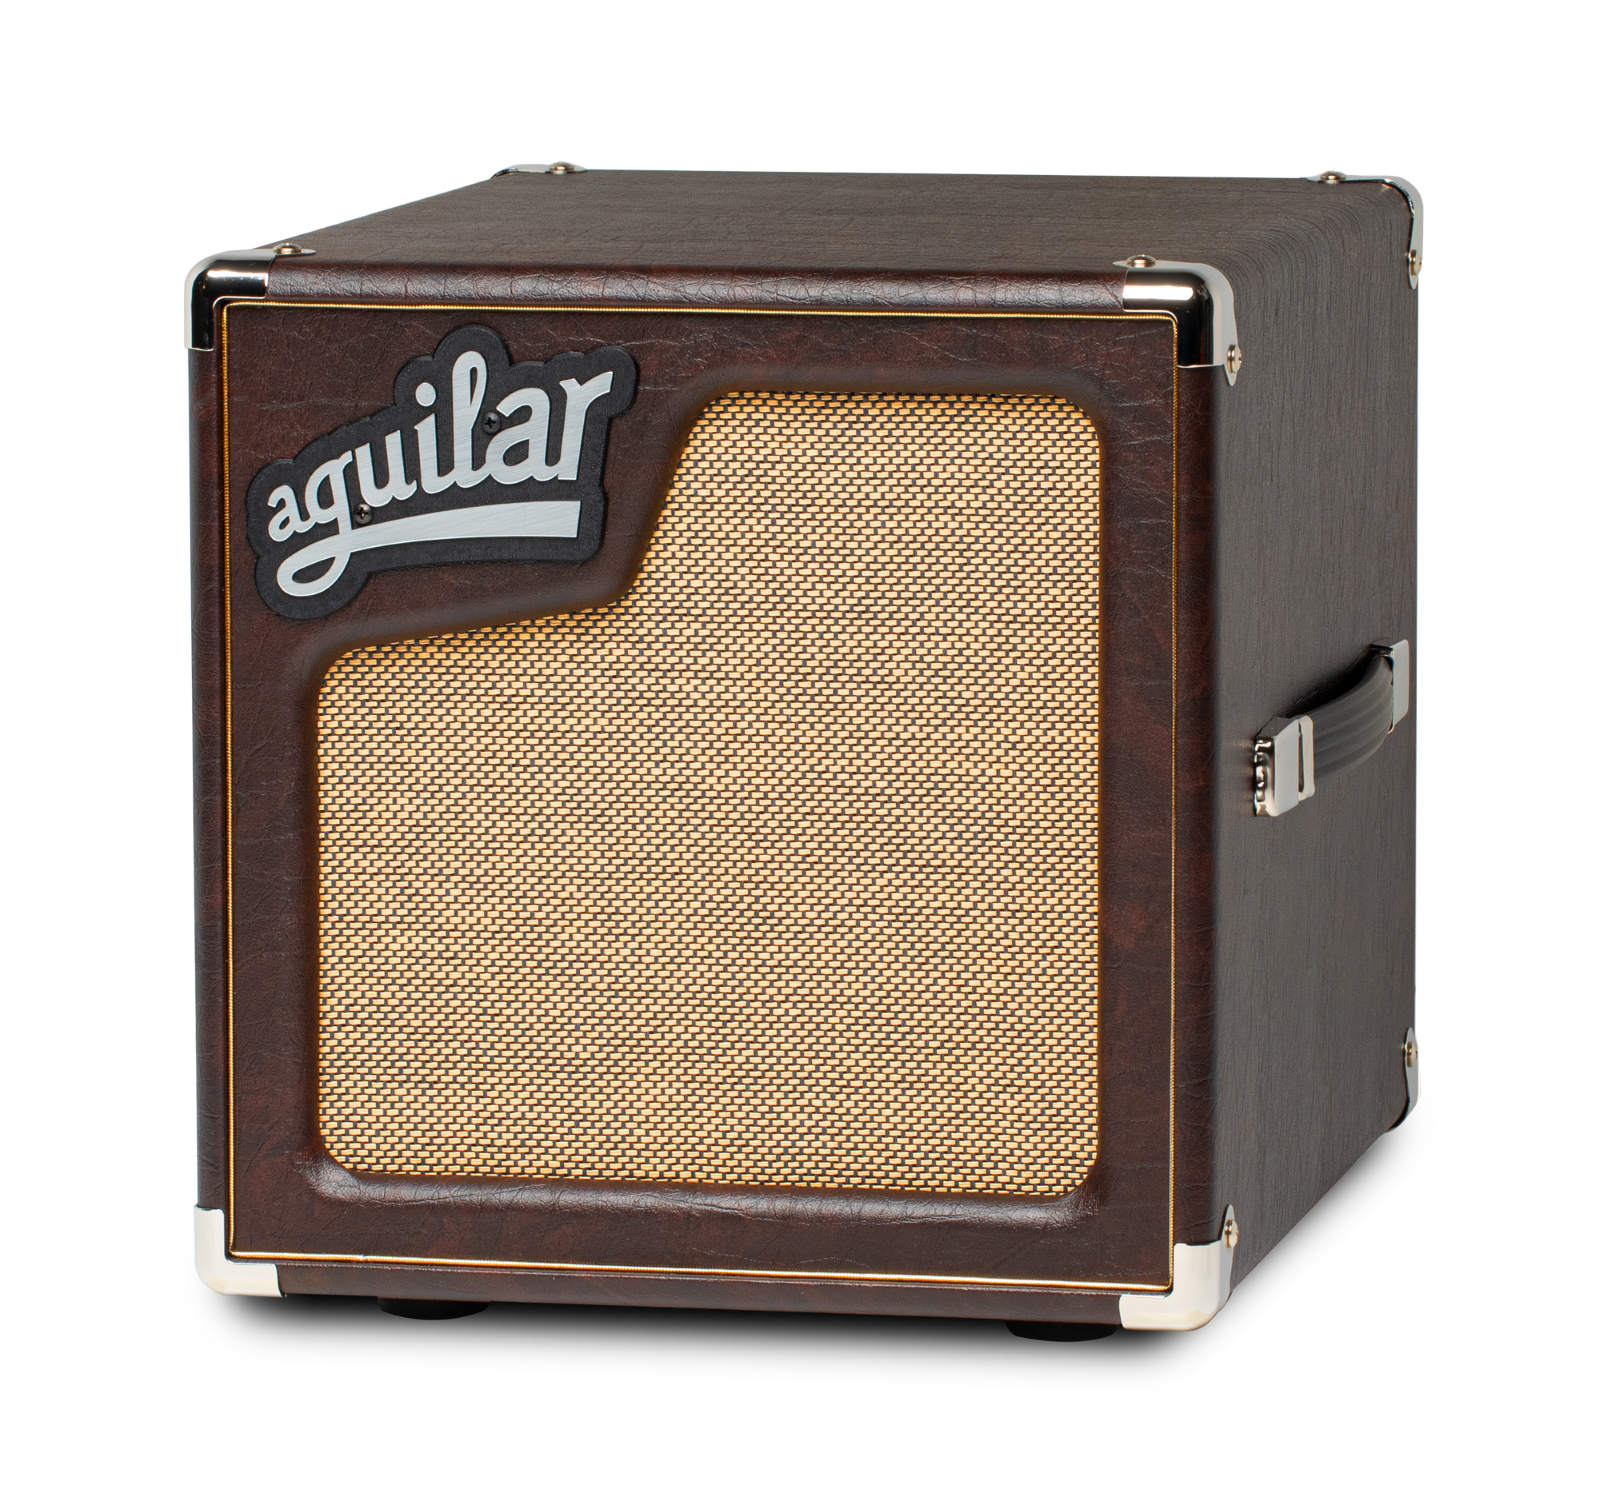 Aguilar SL110 Chocolate Brown Limited Edition - 8 Ohms : photo 1